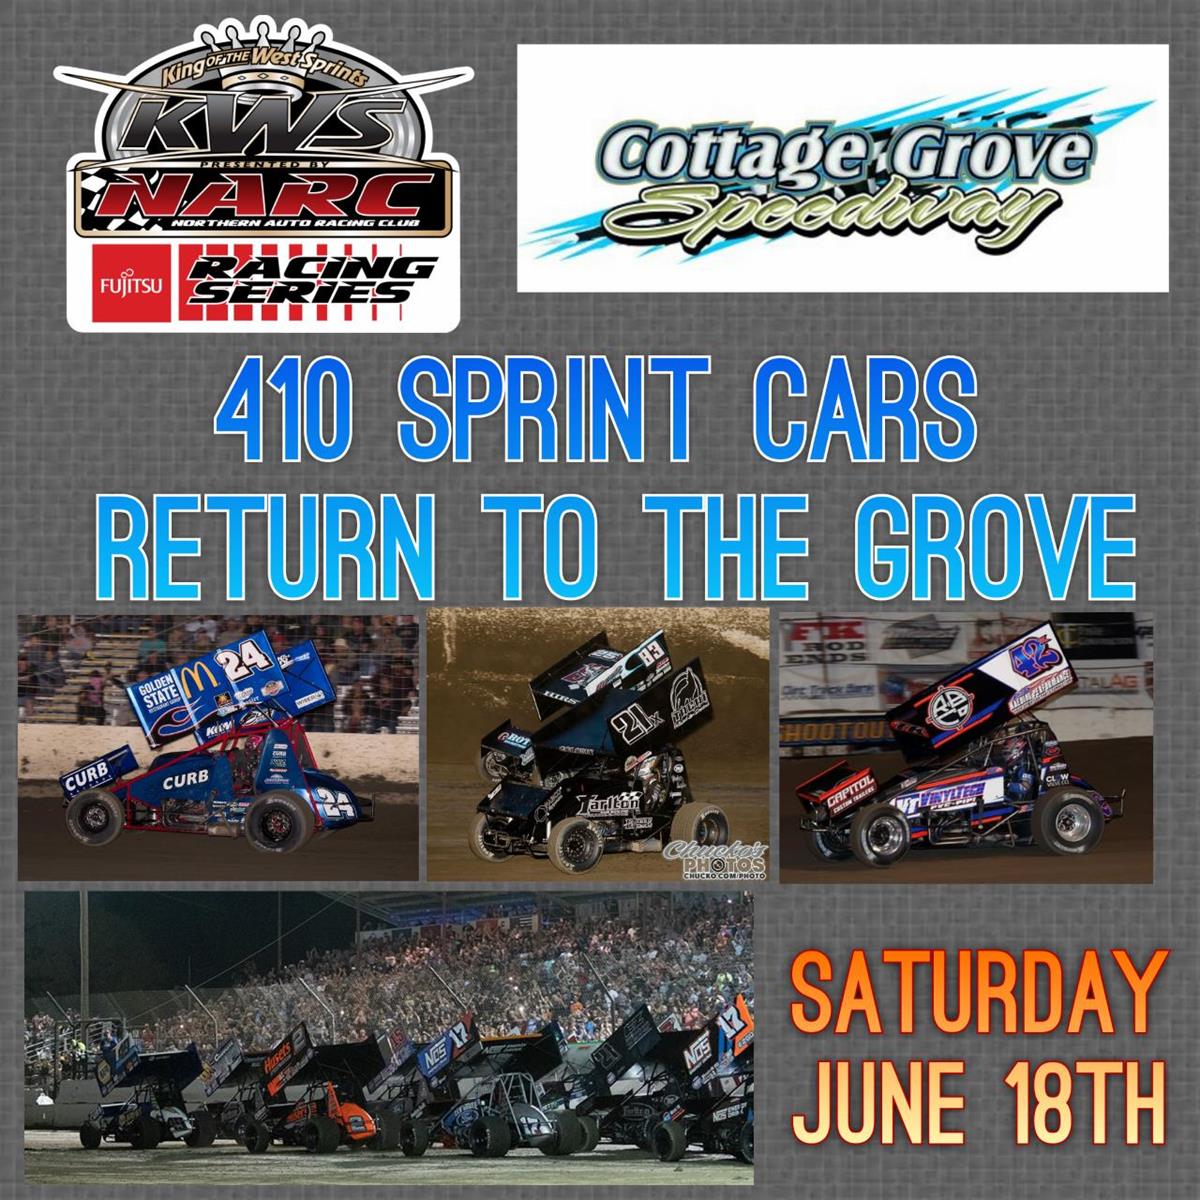 RACING IS STILL ON FOR SATURDAY, JUNE 18TH AT COTTAGE GROVE SPEEDWAY!!